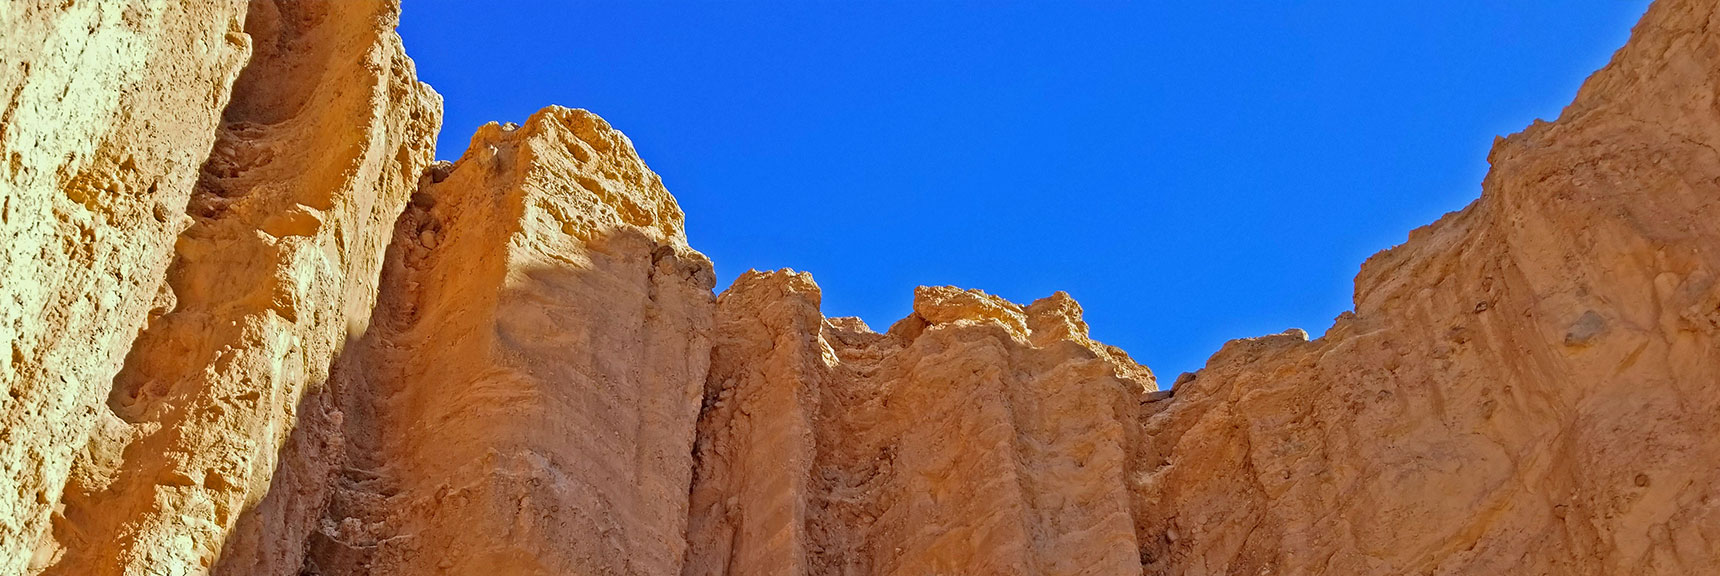 Spectacular Towering Cliff Walls at Red Cathedral, Upper End of Golden Canyon. | Golden Canyon to Zabriskie Point | Death Valley National Park, California